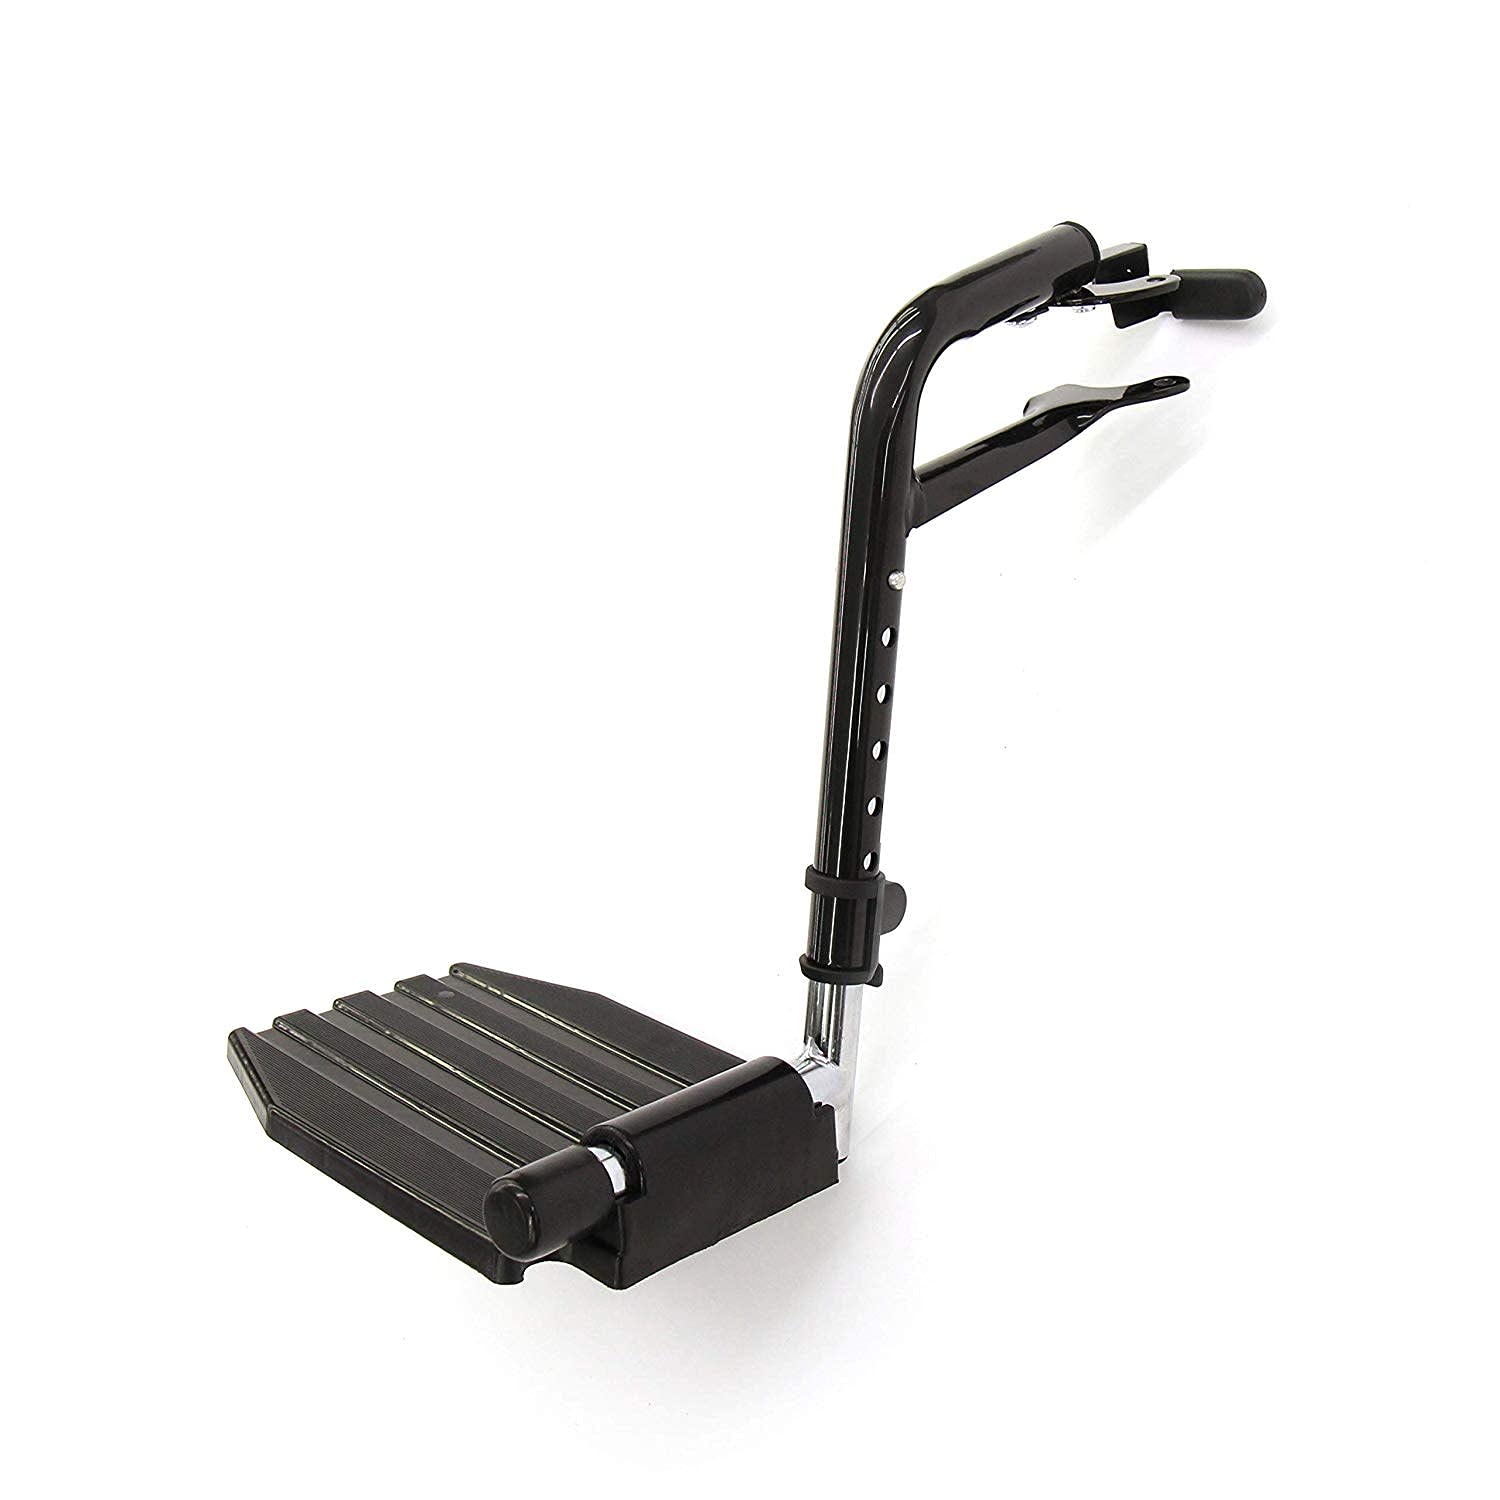 One left-side image of an Invacare wheelchair economy footrest, item number T93HEP with black tubing and black composite footrest in a vertical position against a white background.